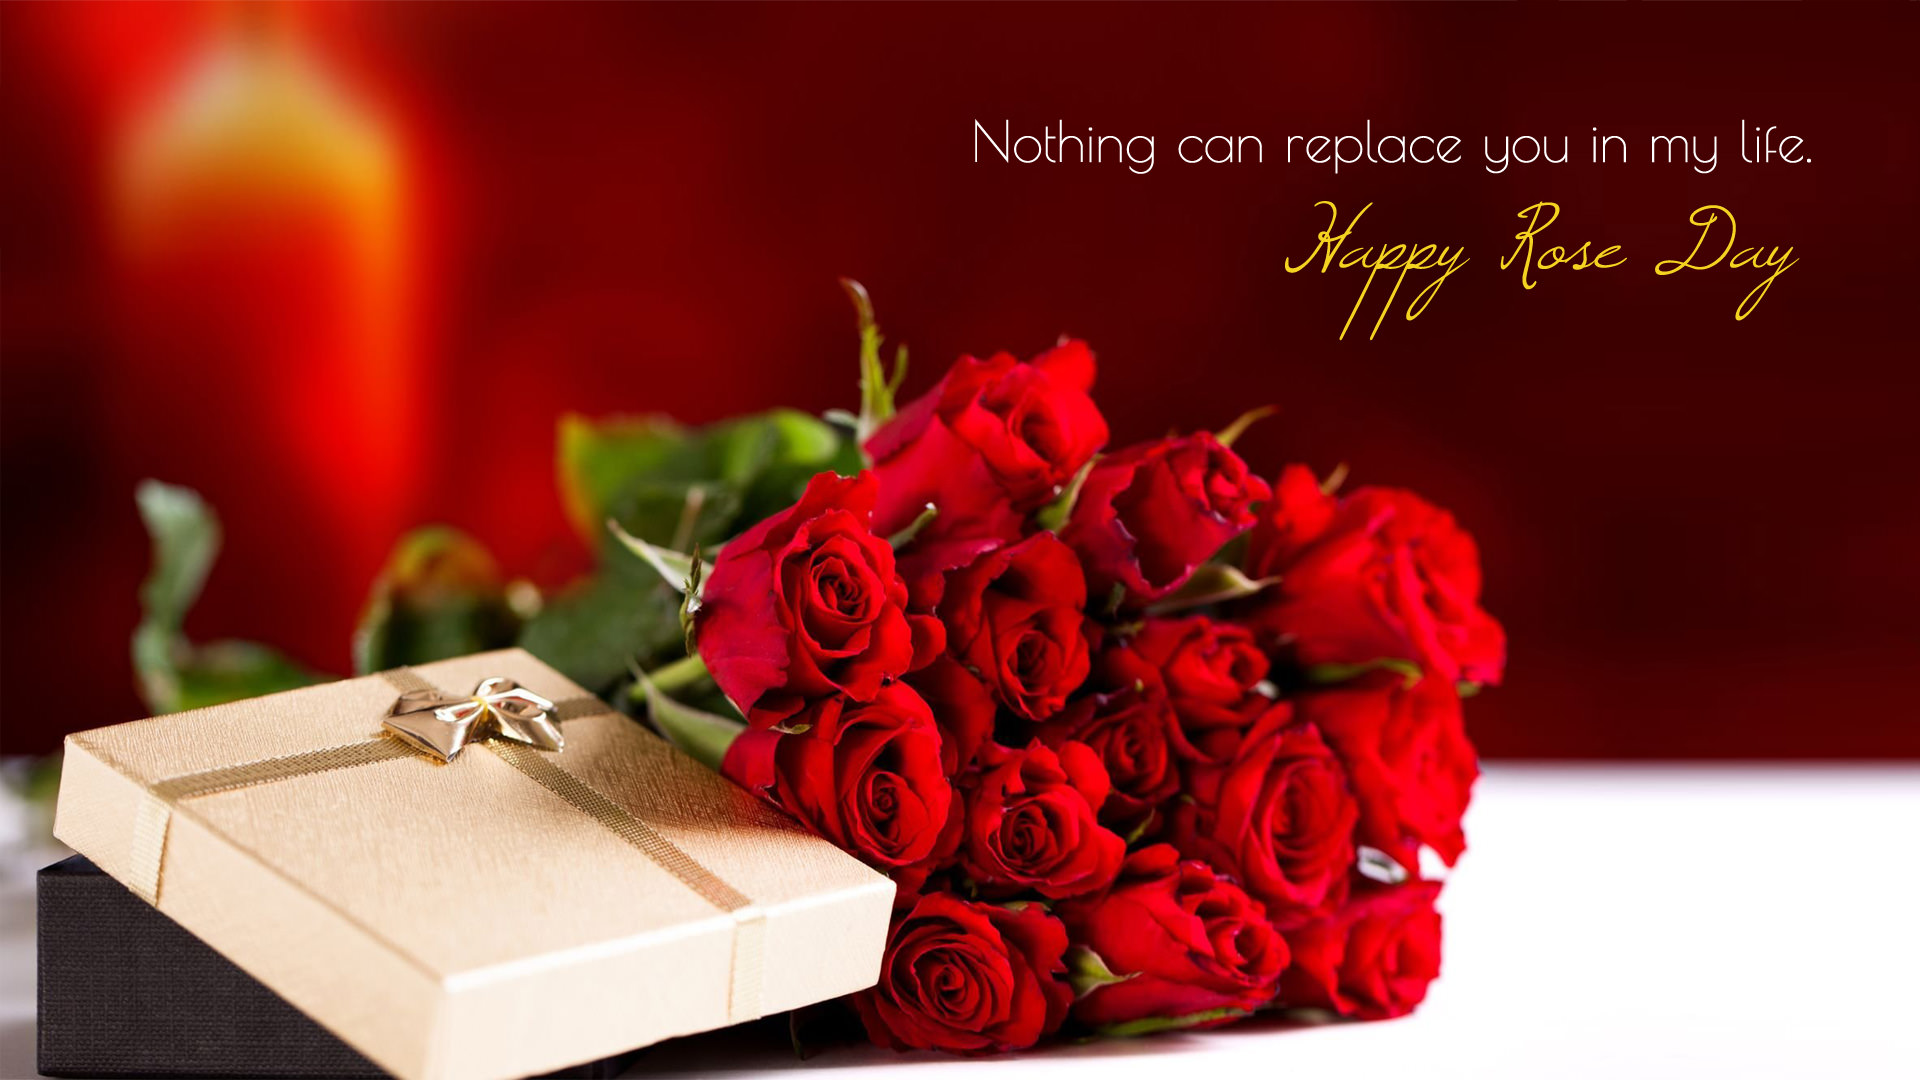 happy rose day wallpaper,rot,valentinstag,liebe,blume,text